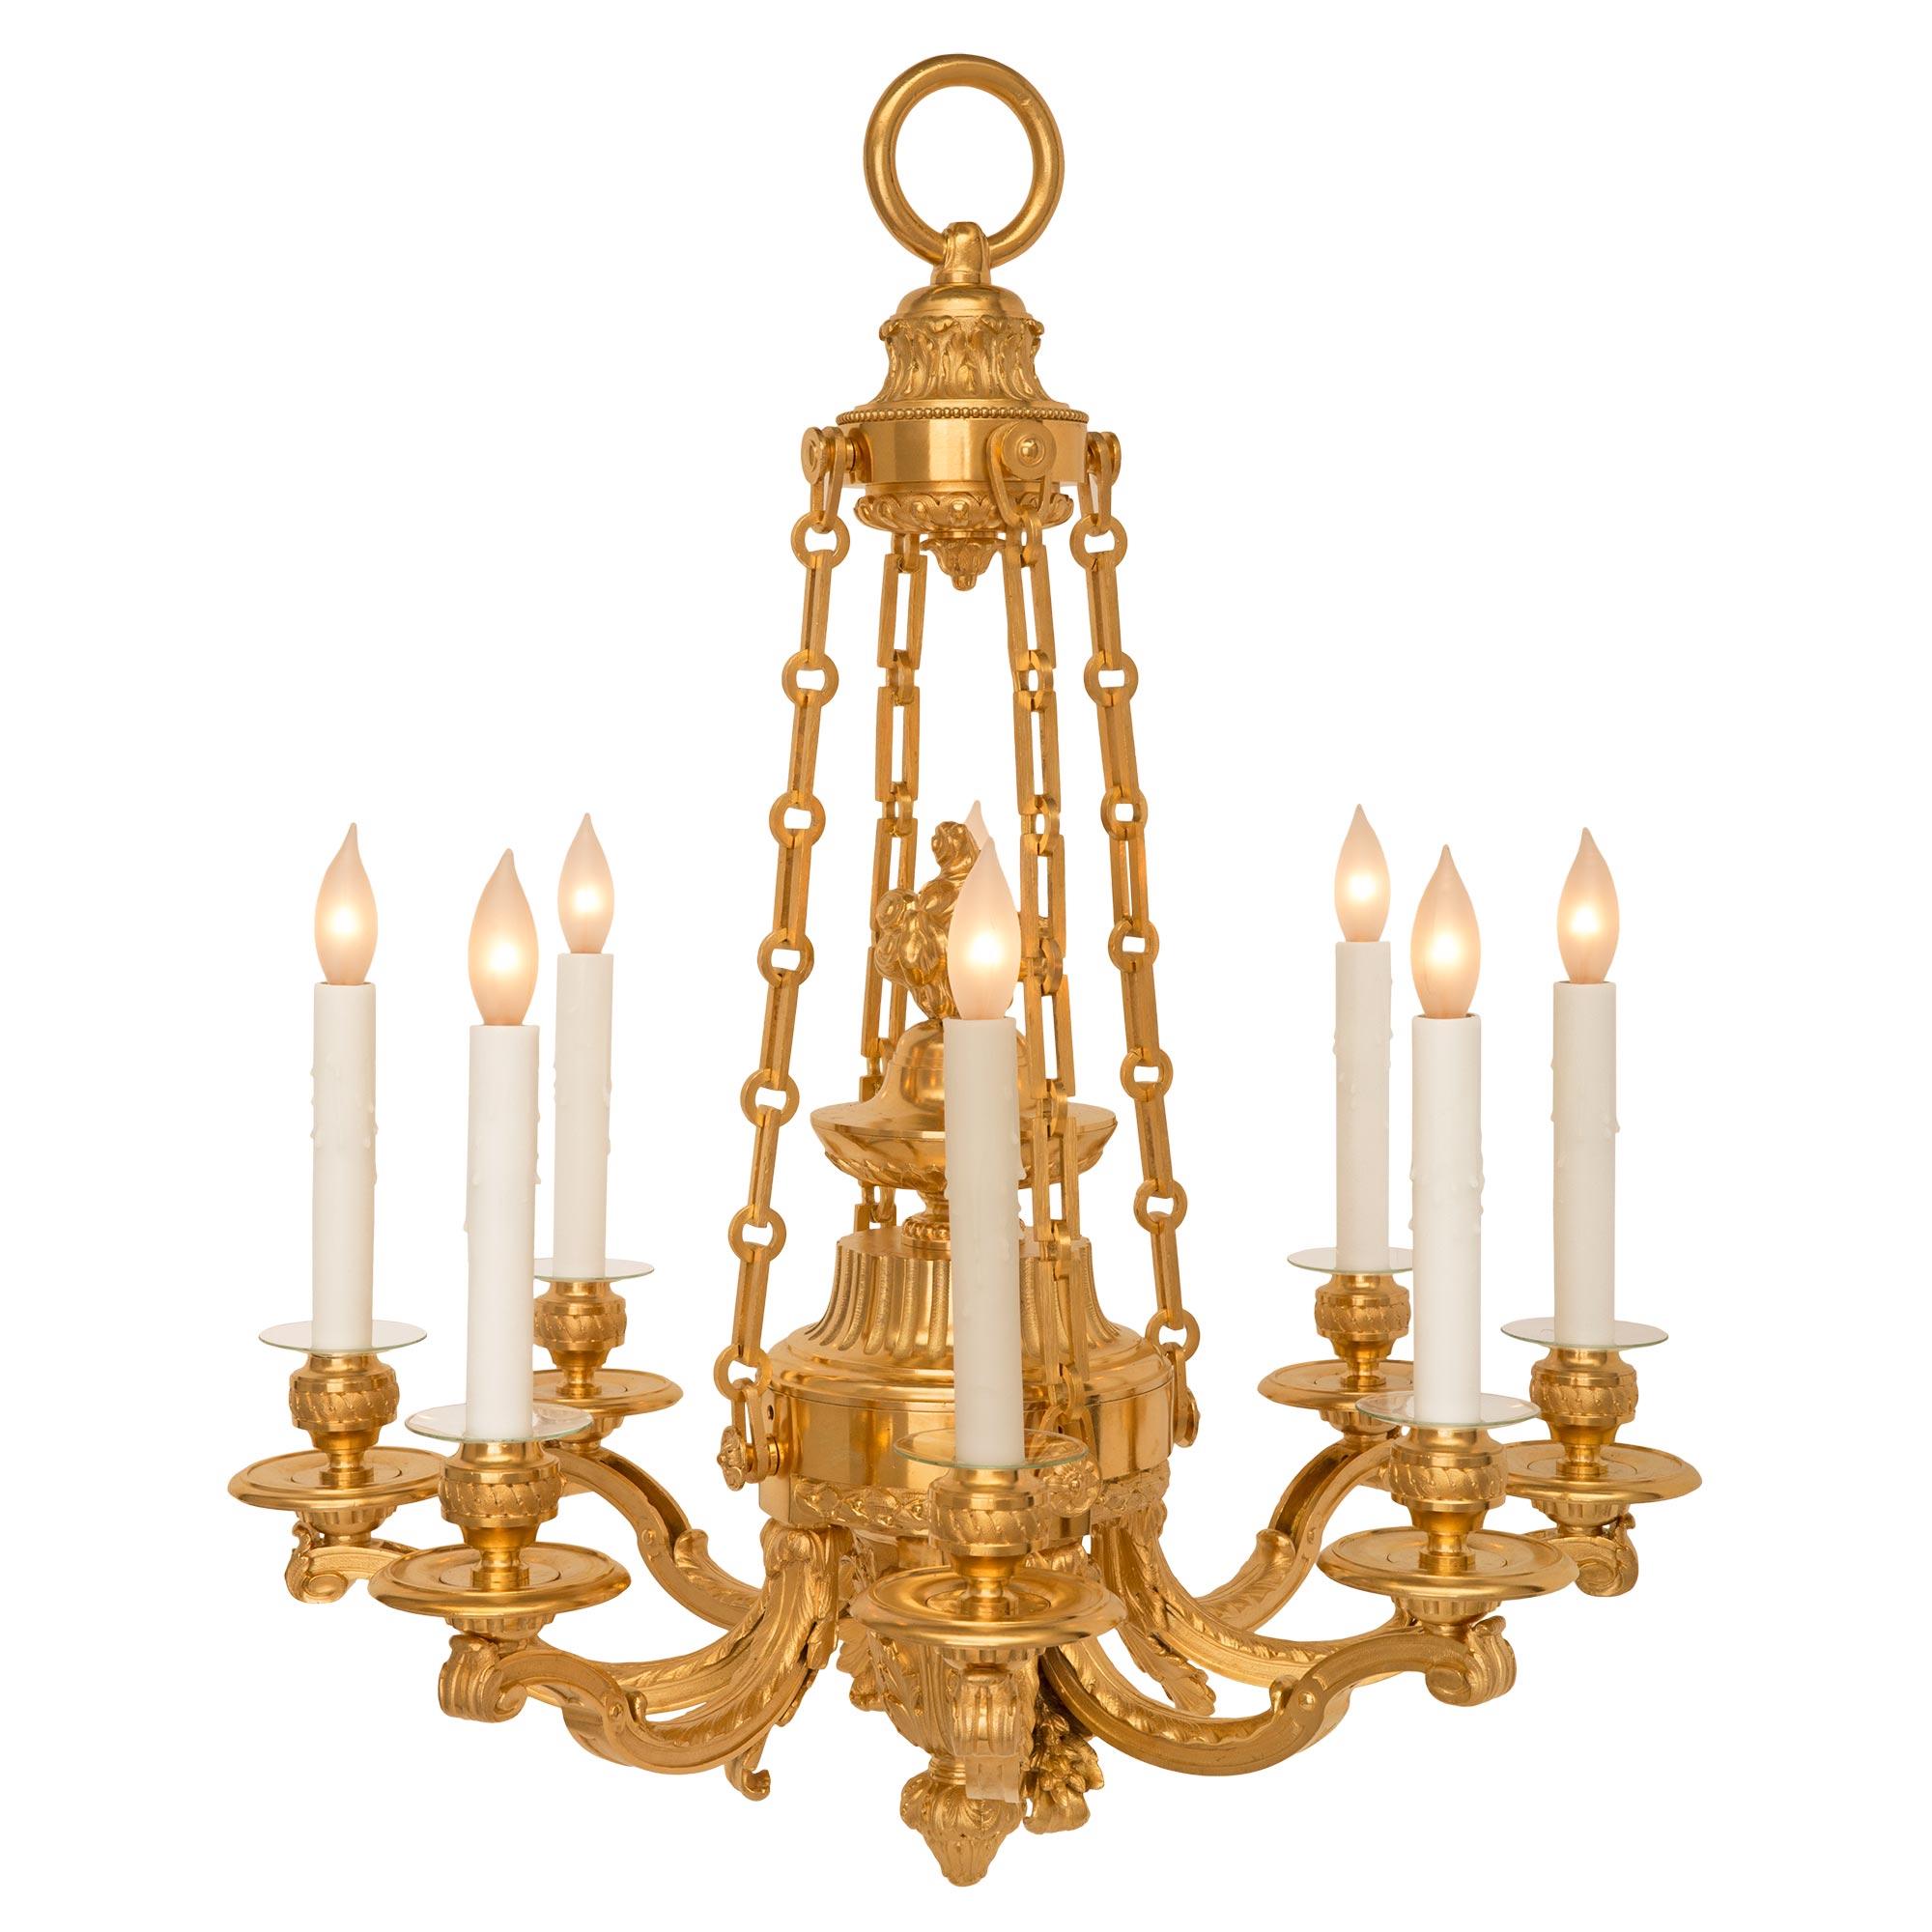 A beautiful and very high quality French 19th century Louis XVI st. ormolu chandelier. The eight arm chandelier is centered by a finely detailed bottom acorn final amidst beautiful acanthus leaf designs. At the center is the elegant lightly curved